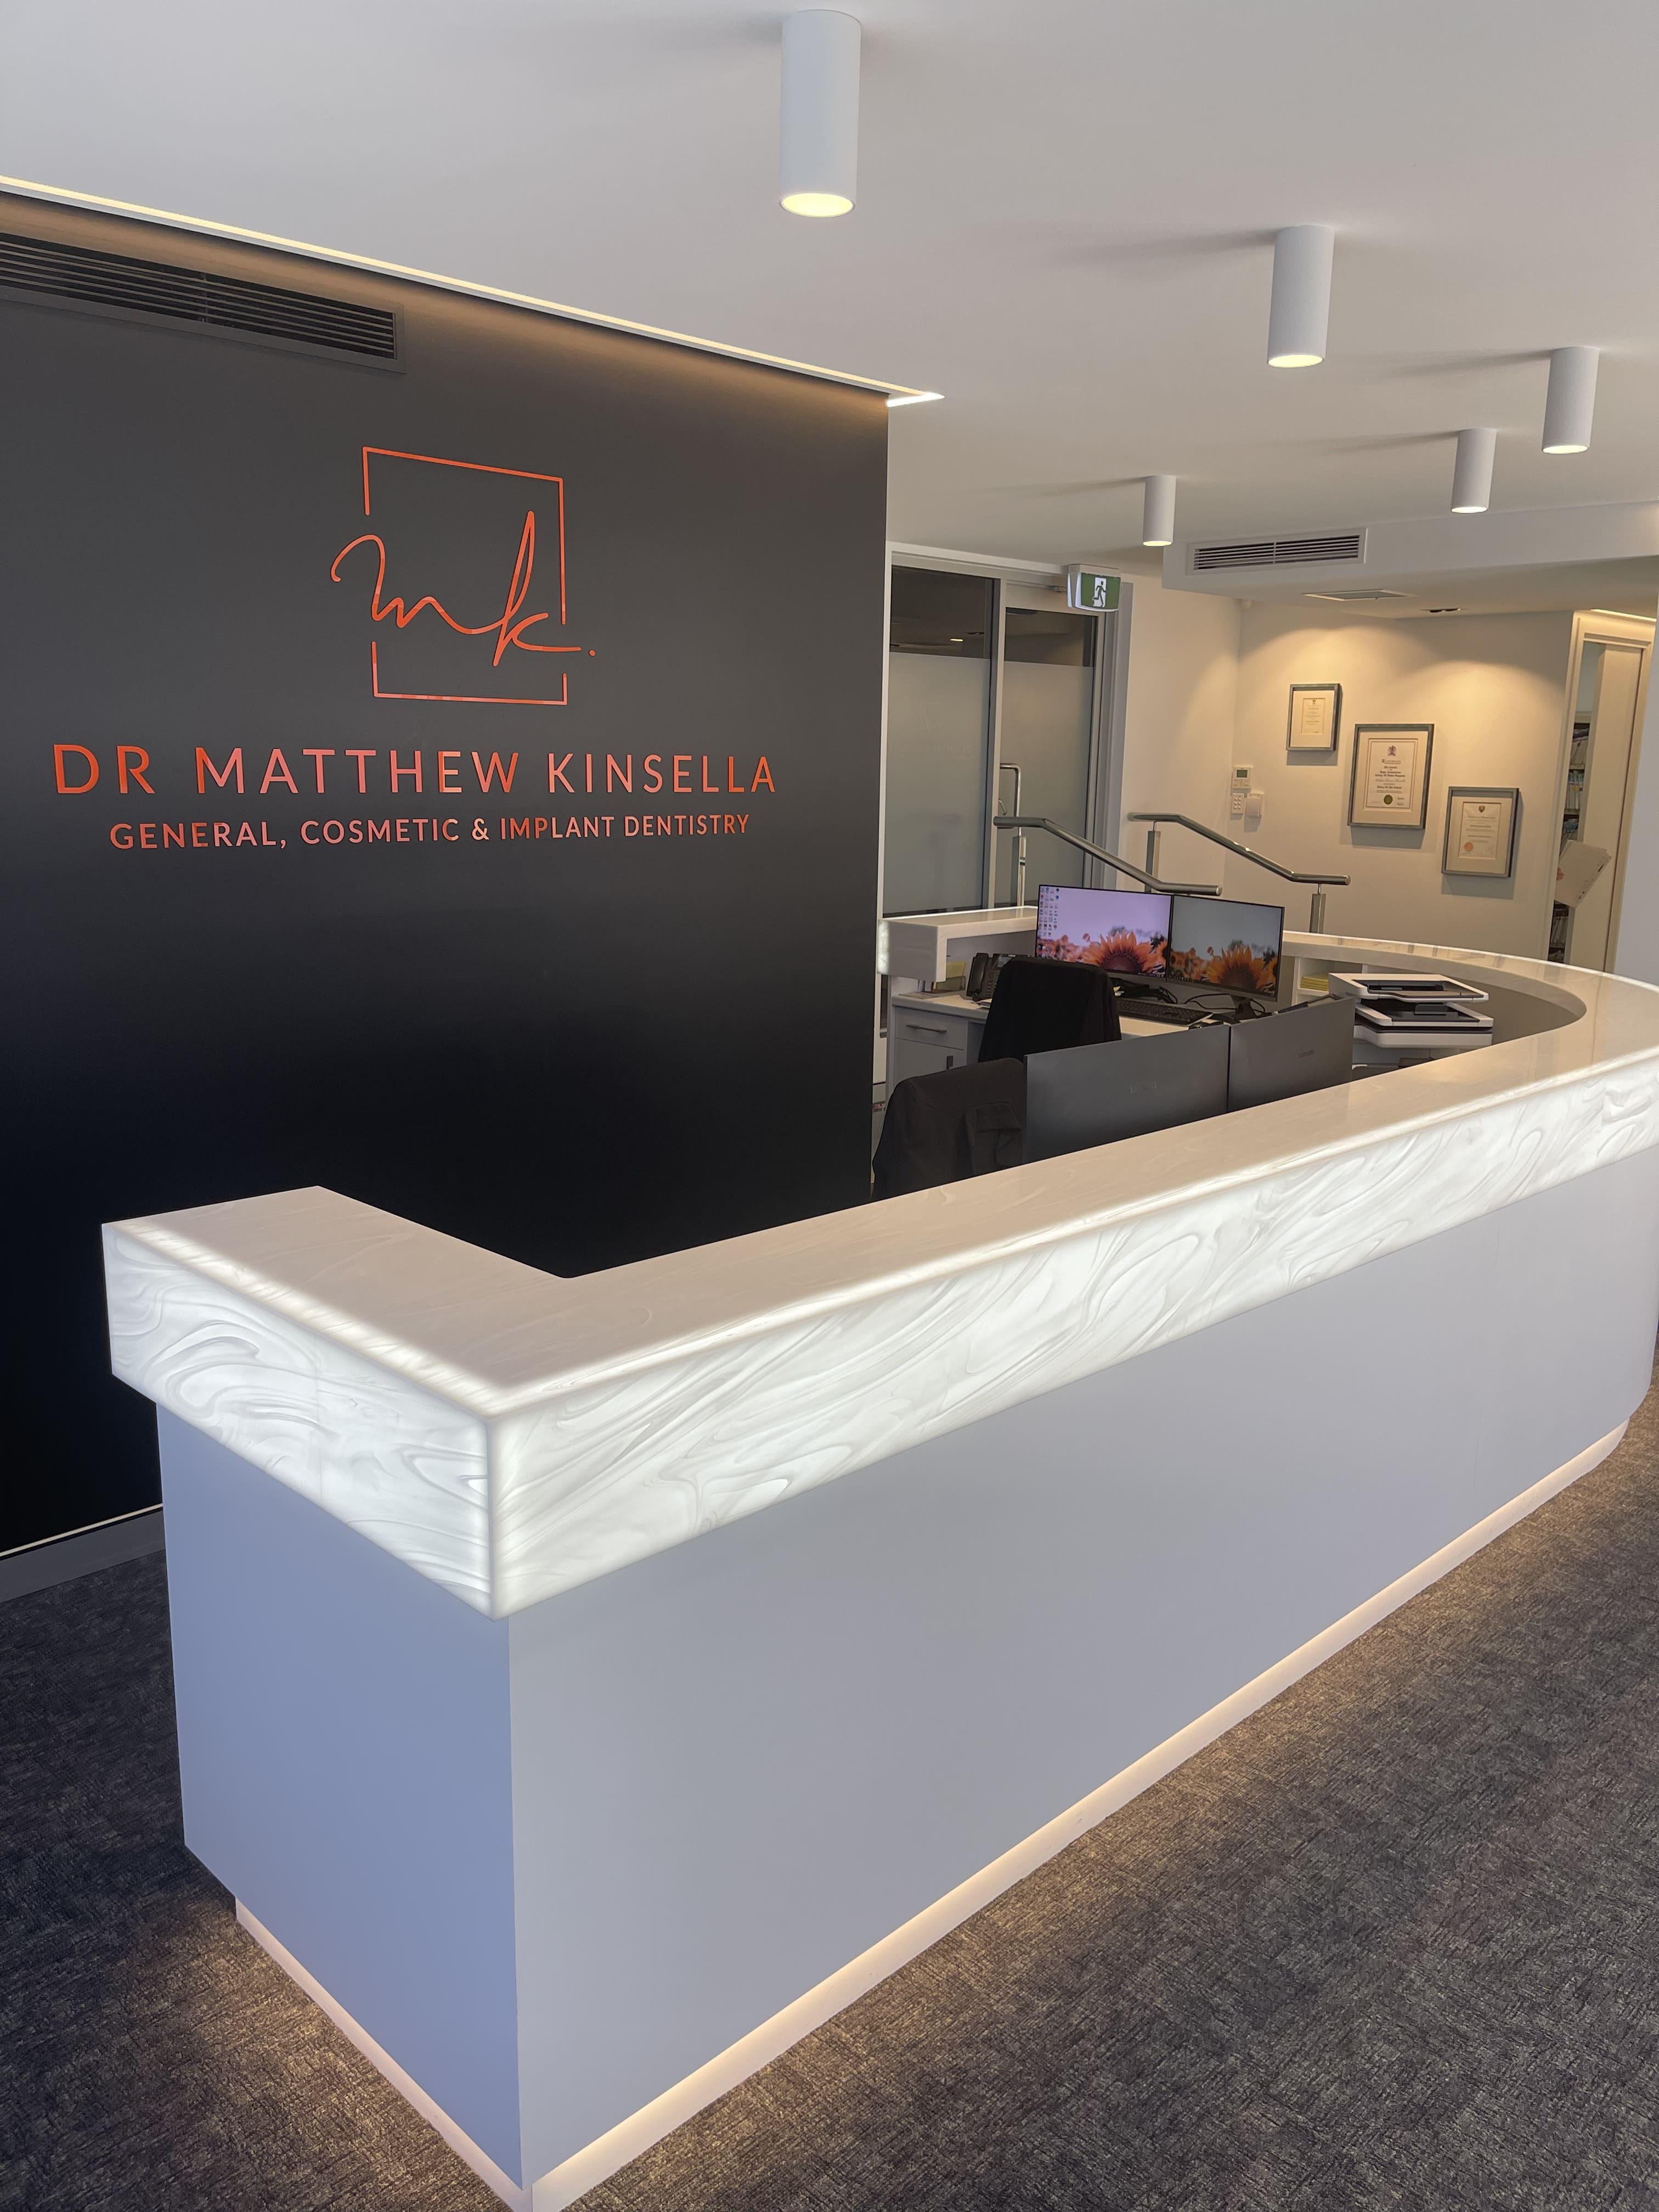 Images Dr Matthew Kinsella, General, Cosmetic & Implant Dentistry